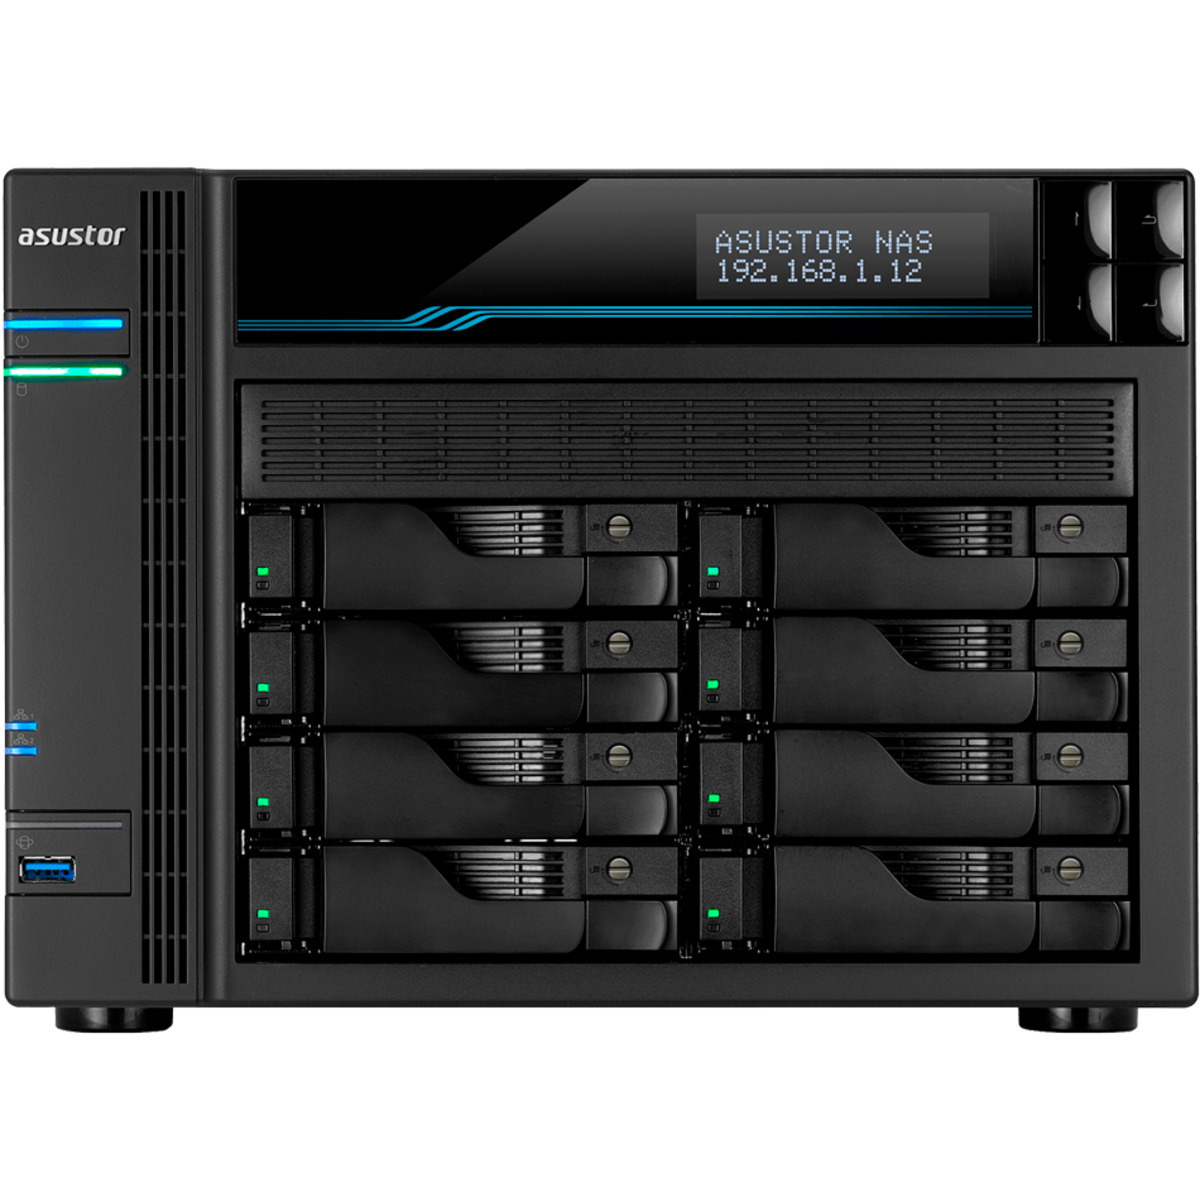 ASUSTOR AS6508T Lockerstor 8 56tb 8-Bay Desktop Multimedia / Power User / Business NAS - Network Attached Storage Device 7x8tb Seagate IronWolf Pro ST8000NT001 3.5 7200rpm SATA 6Gb/s HDD NAS Class Drives Installed - Burn-In Tested - ON SALE - FREE RAM UPGRADE AS6508T Lockerstor 8